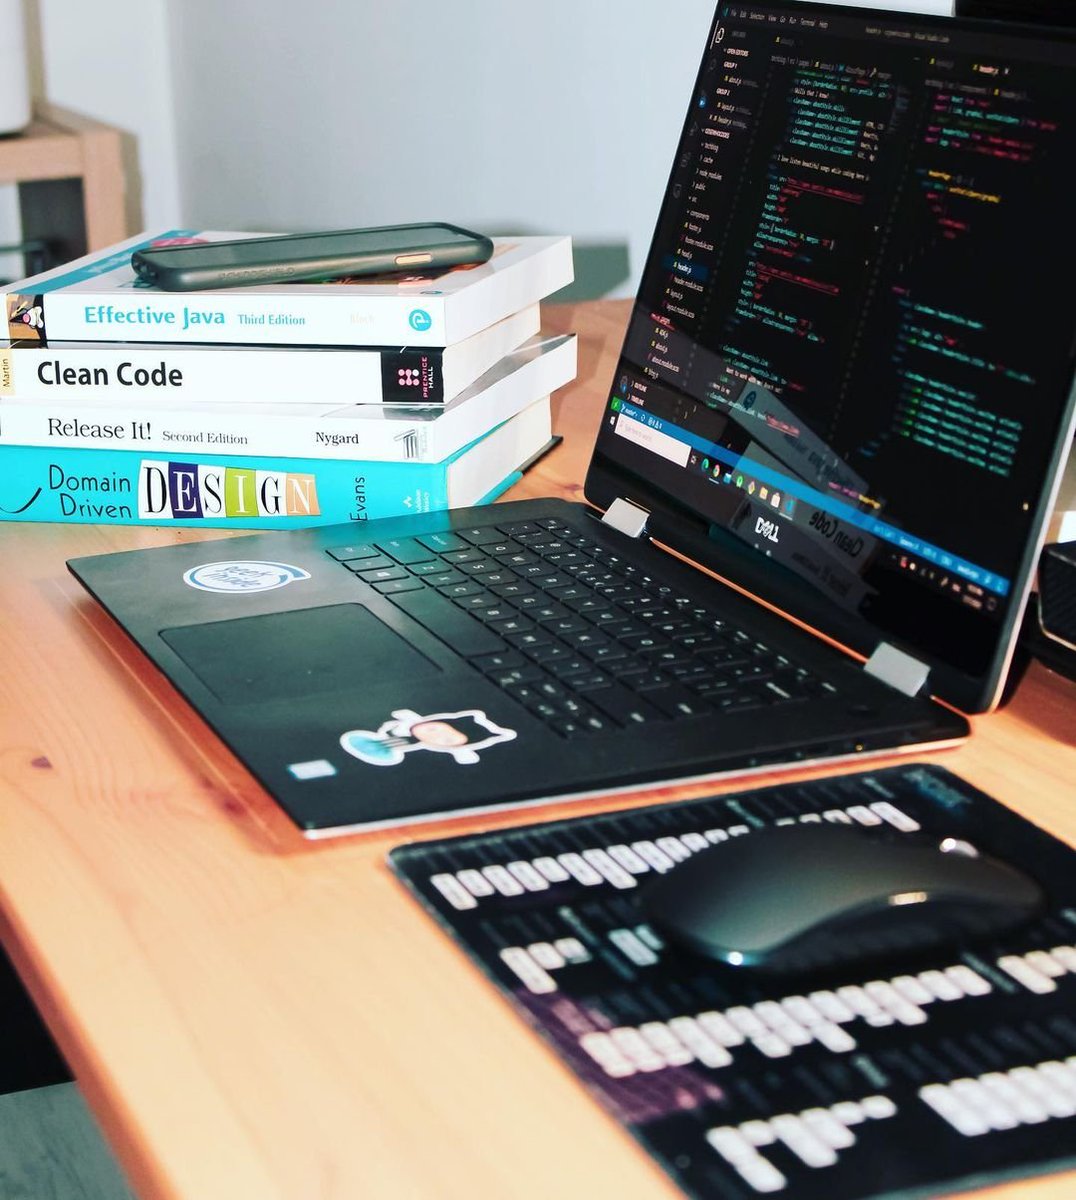 #MonkMode 'Pick 3 books or commit to a full course, whether it's in software engineering, data science, cybersecurity, or trading. Disappear for 6 to 9 months with the intention of mastering your craft. Maintain consistency, learn, and work on real-world projects. We'll